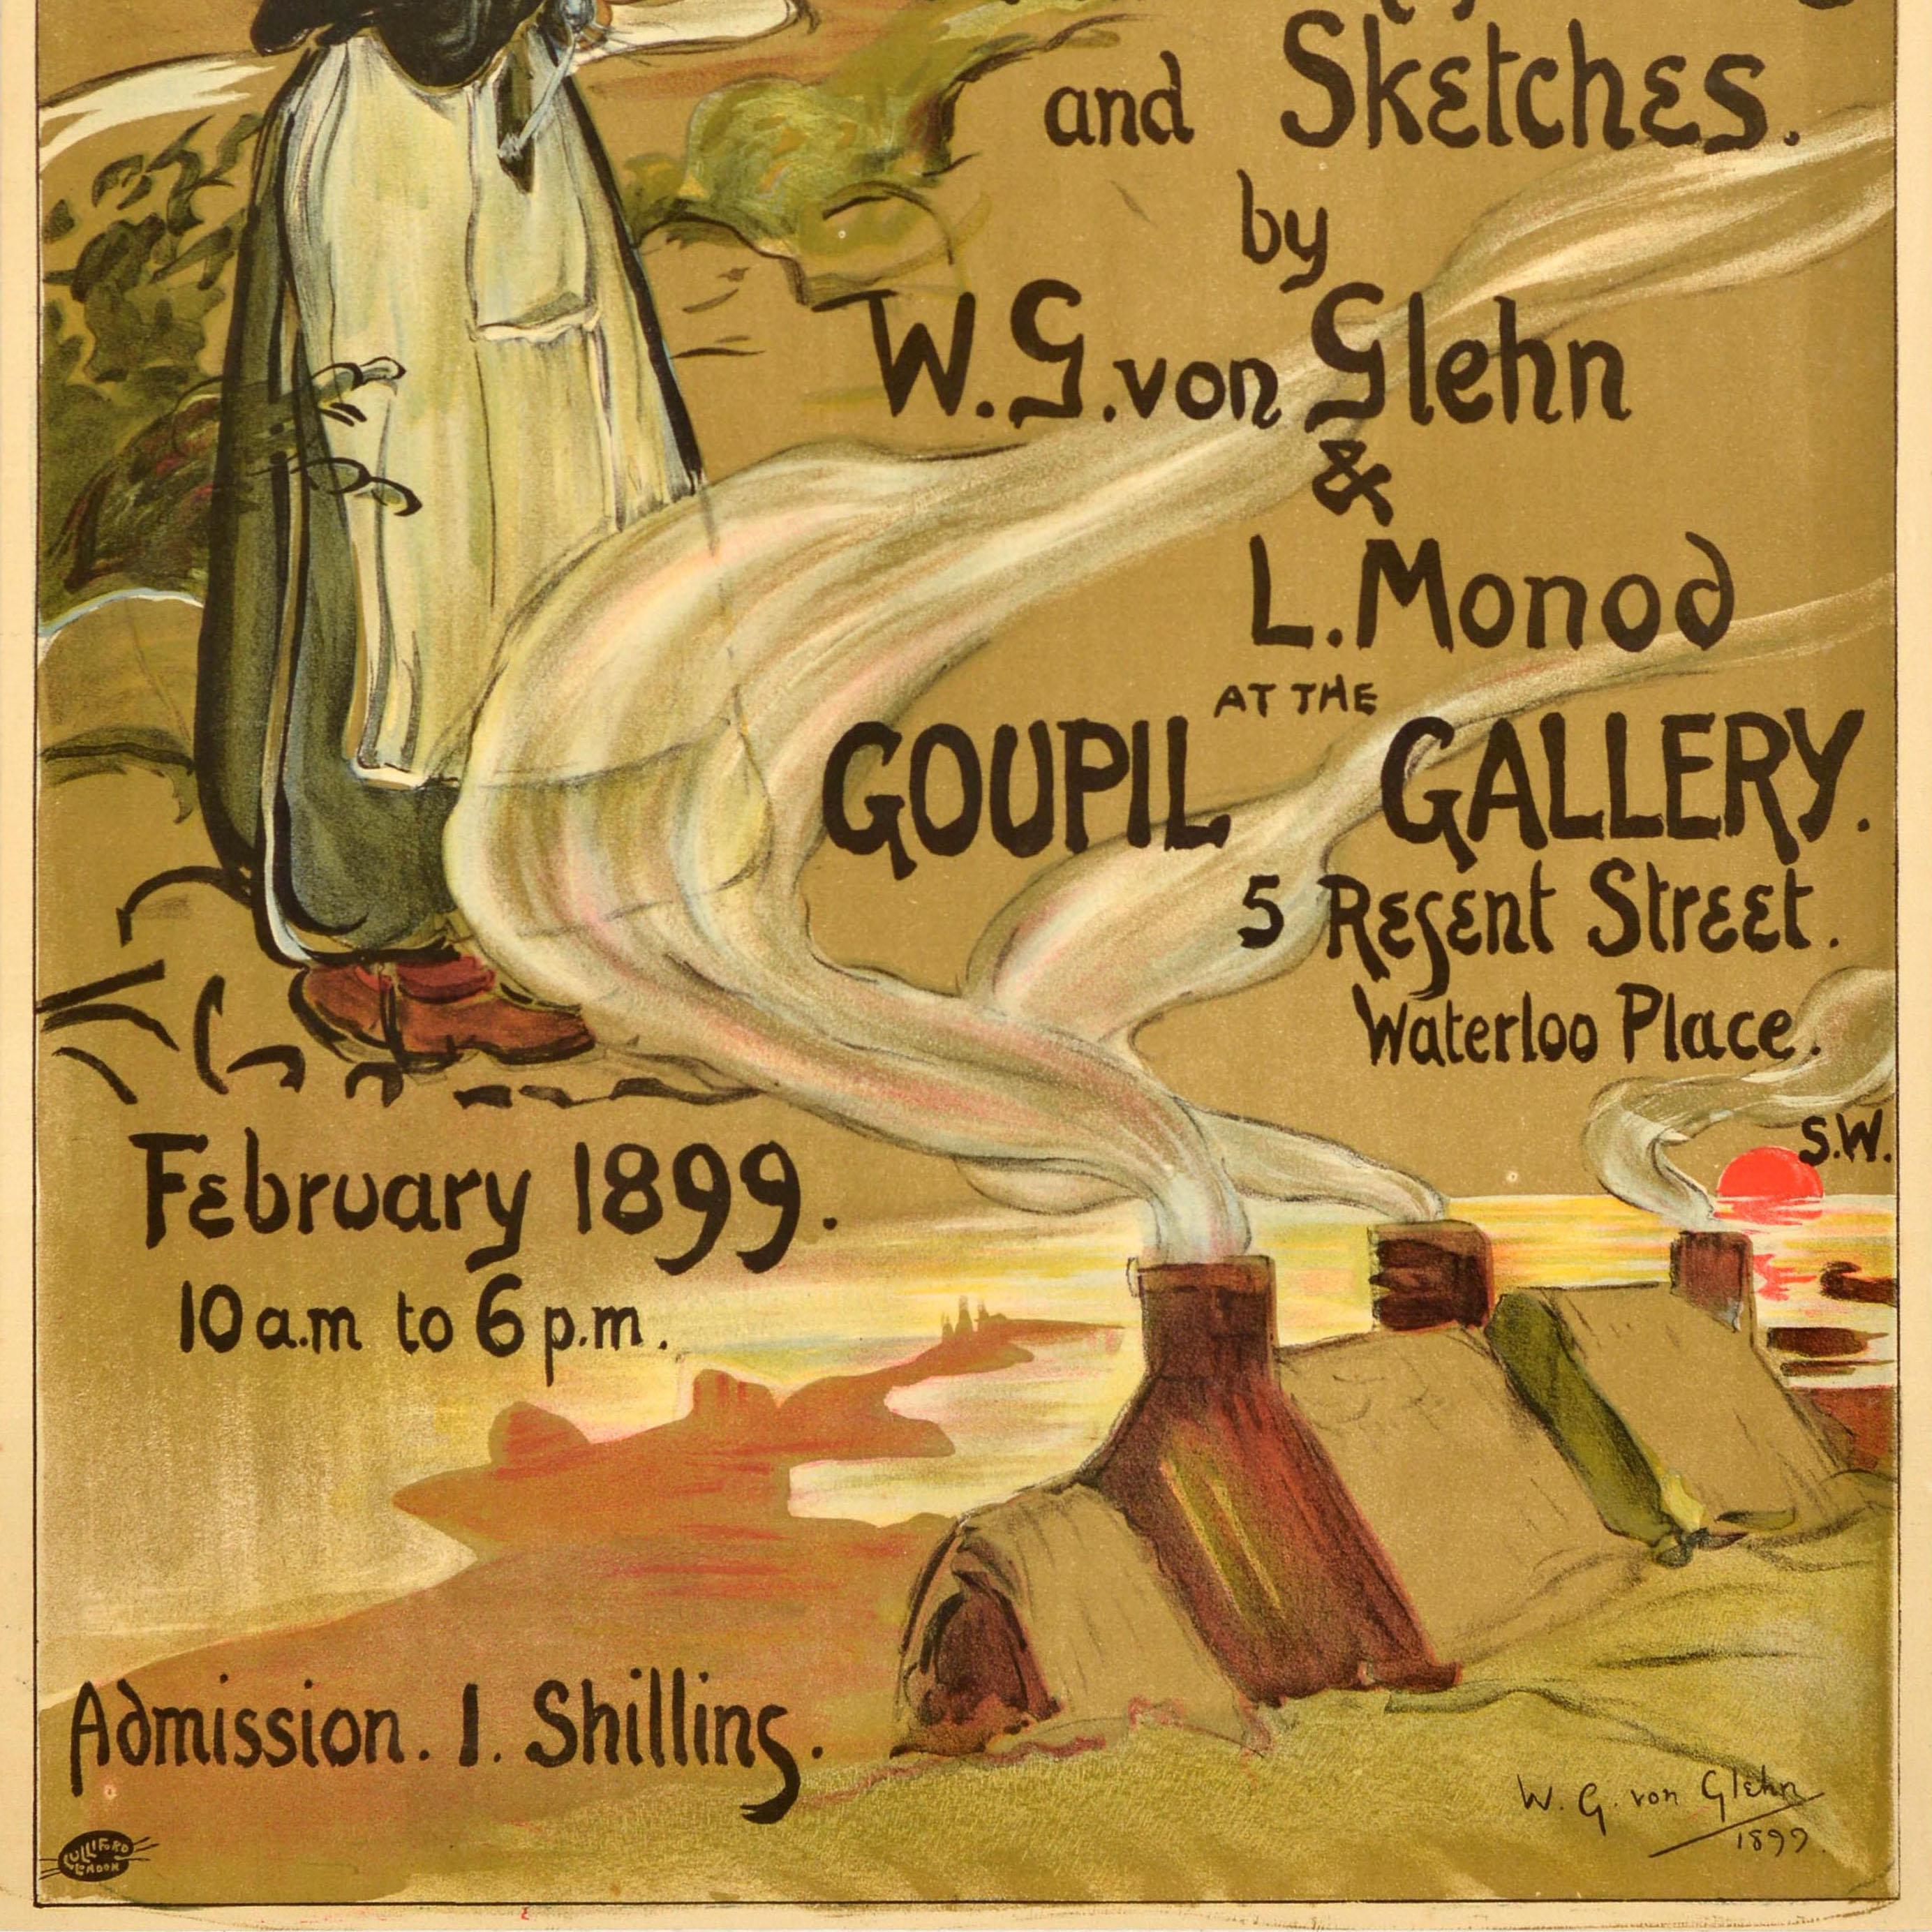 Original antique advertising poster for an Exhibition of Pictures and Sketches by W.G. von Glehn & L. Monod at the Goupil Gallery 5 Regent Street Waterloo Place in London held in February 1899 featuring artwork by the English painter Wilfrid de